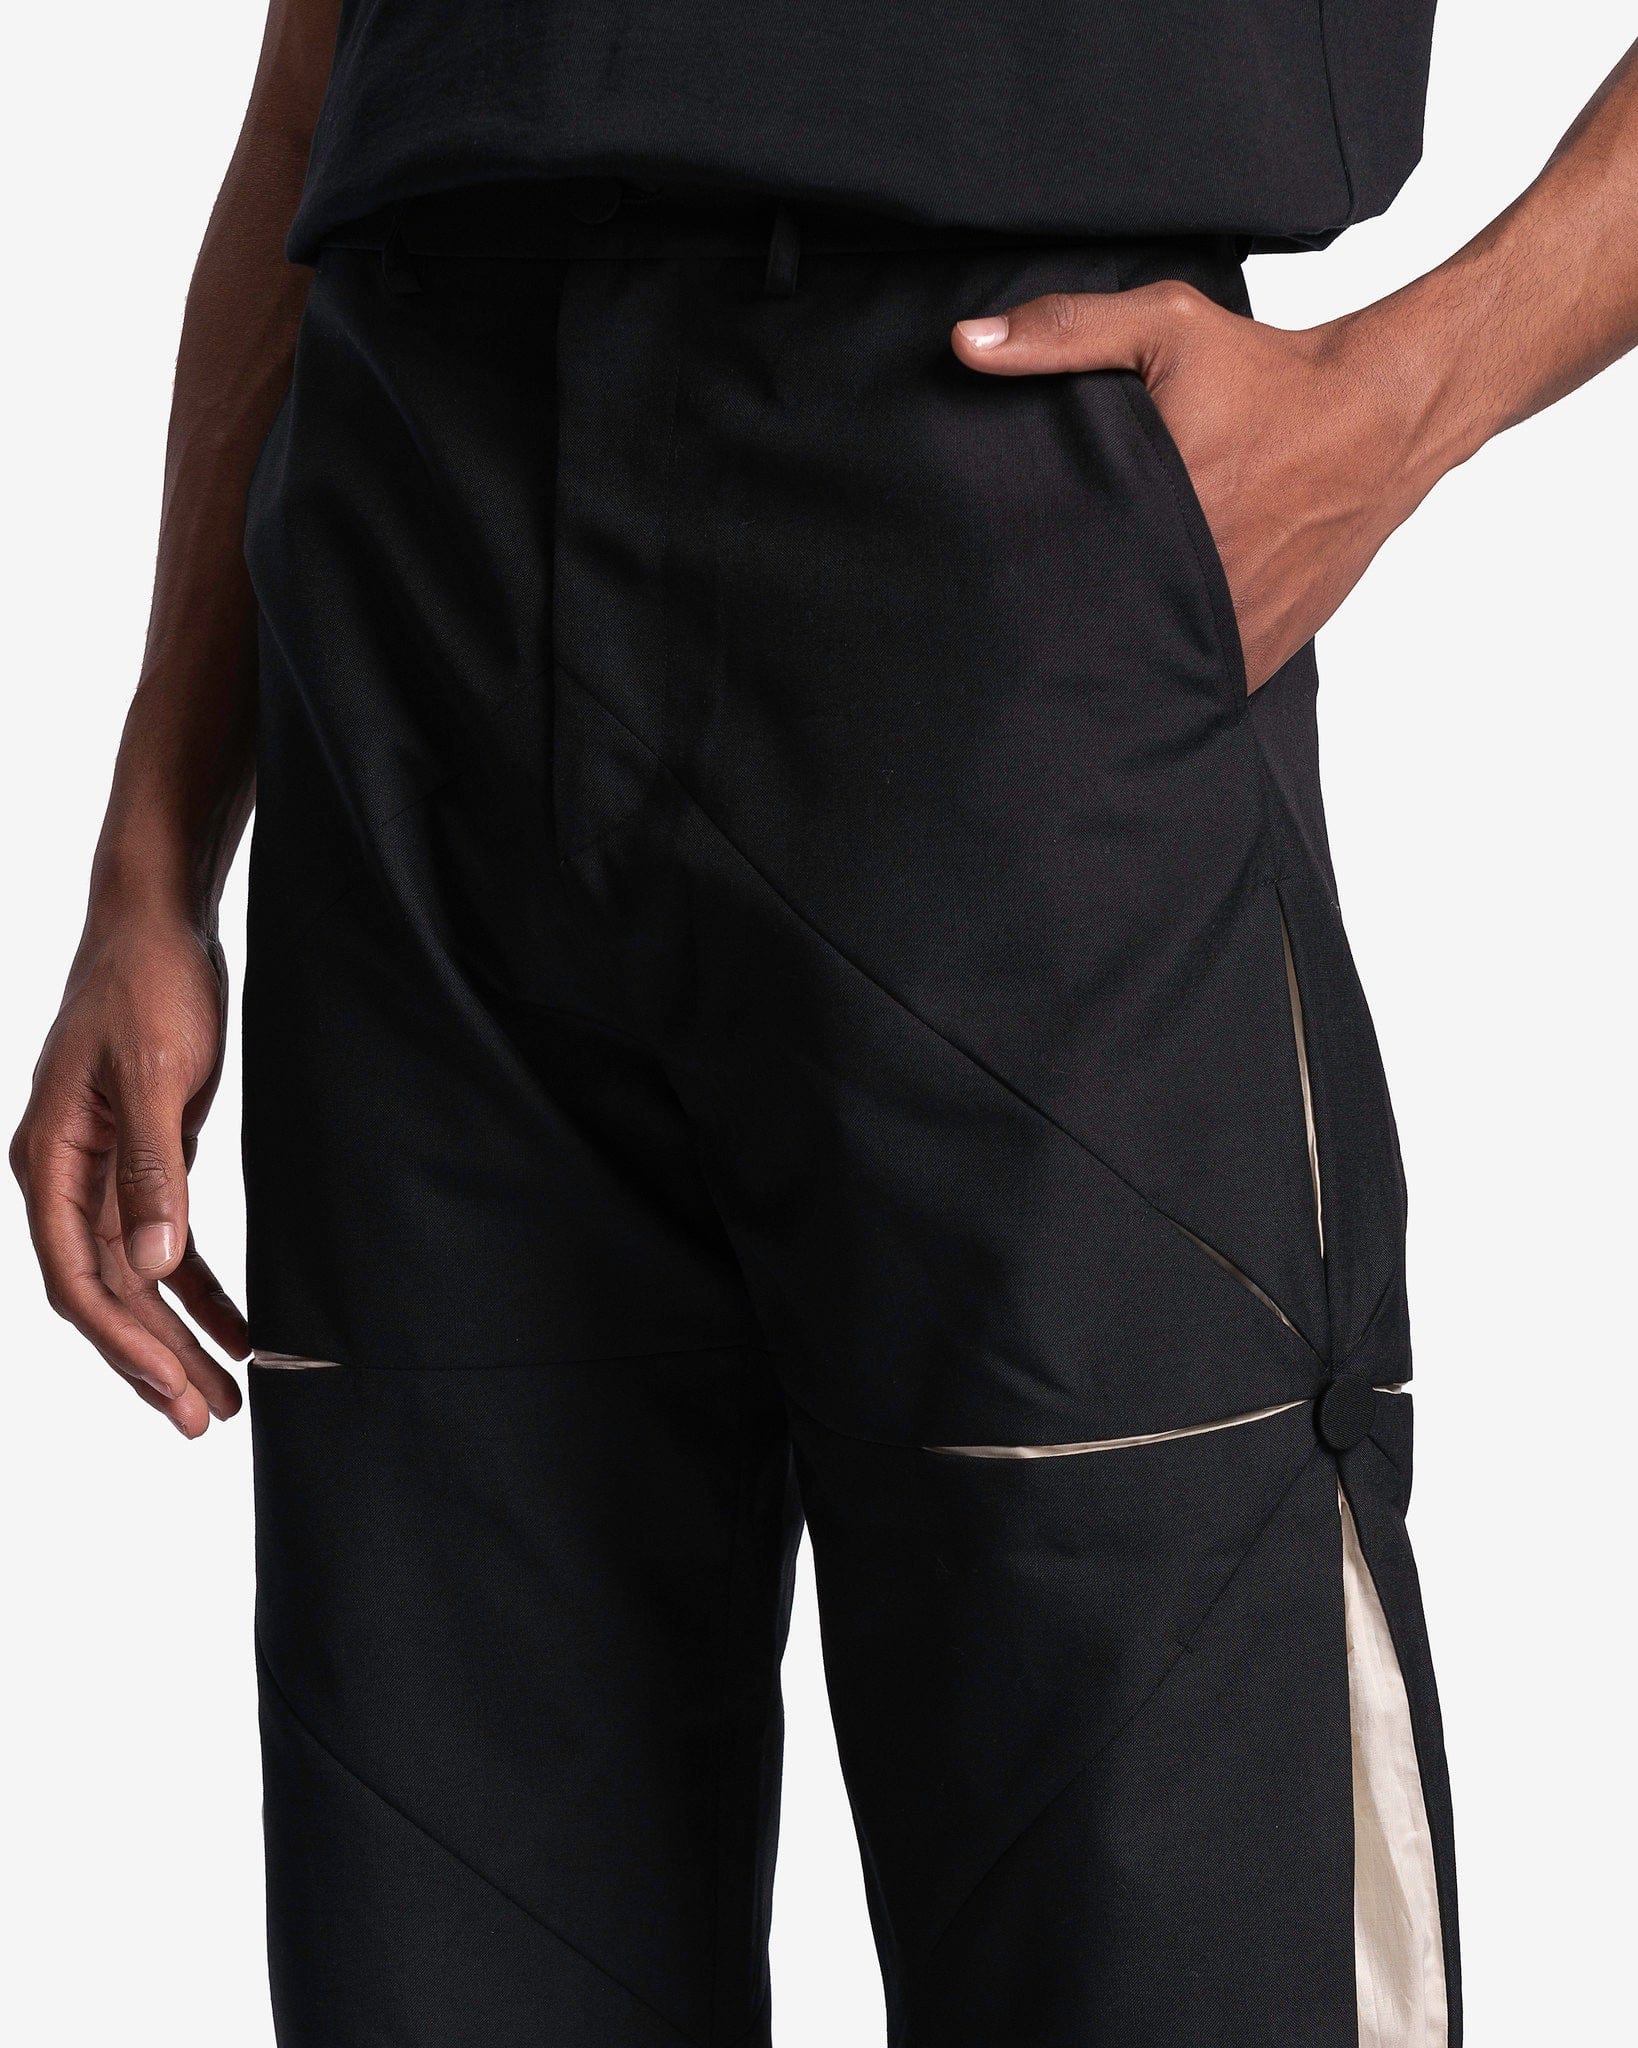 Kusikohc Men's Pants Tailored One Origami Pants in Black